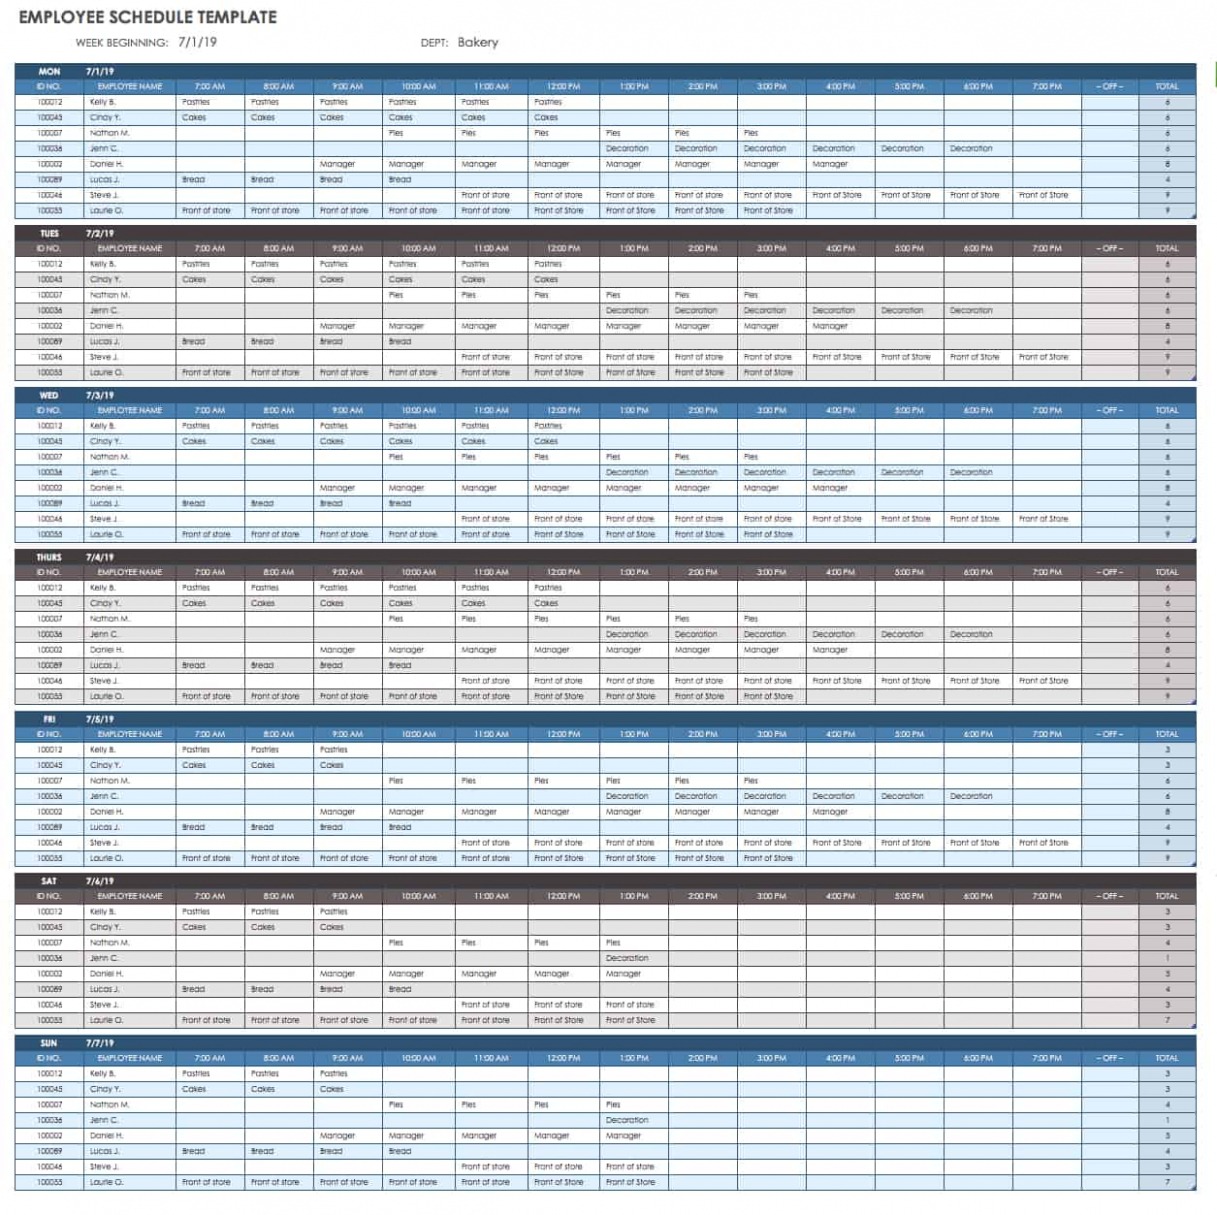 Editable Employee Coverage Schedule Template CSV